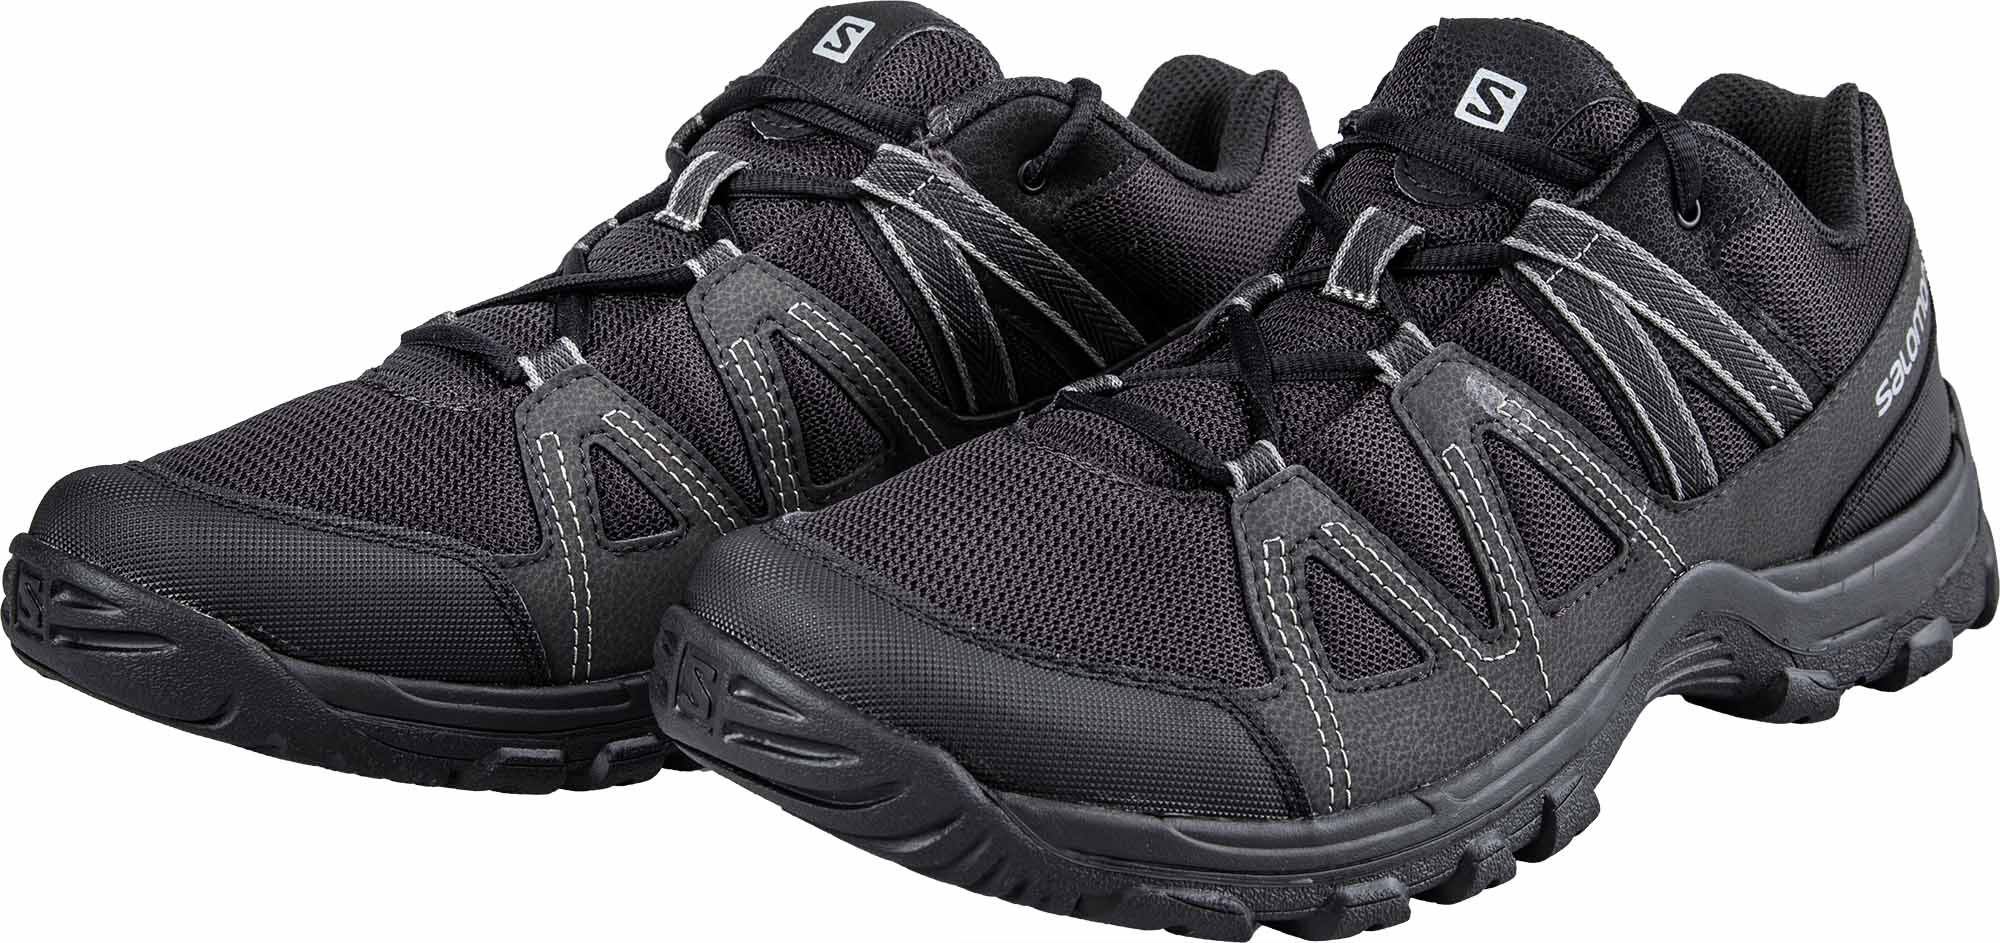 Men’s trail running shoes